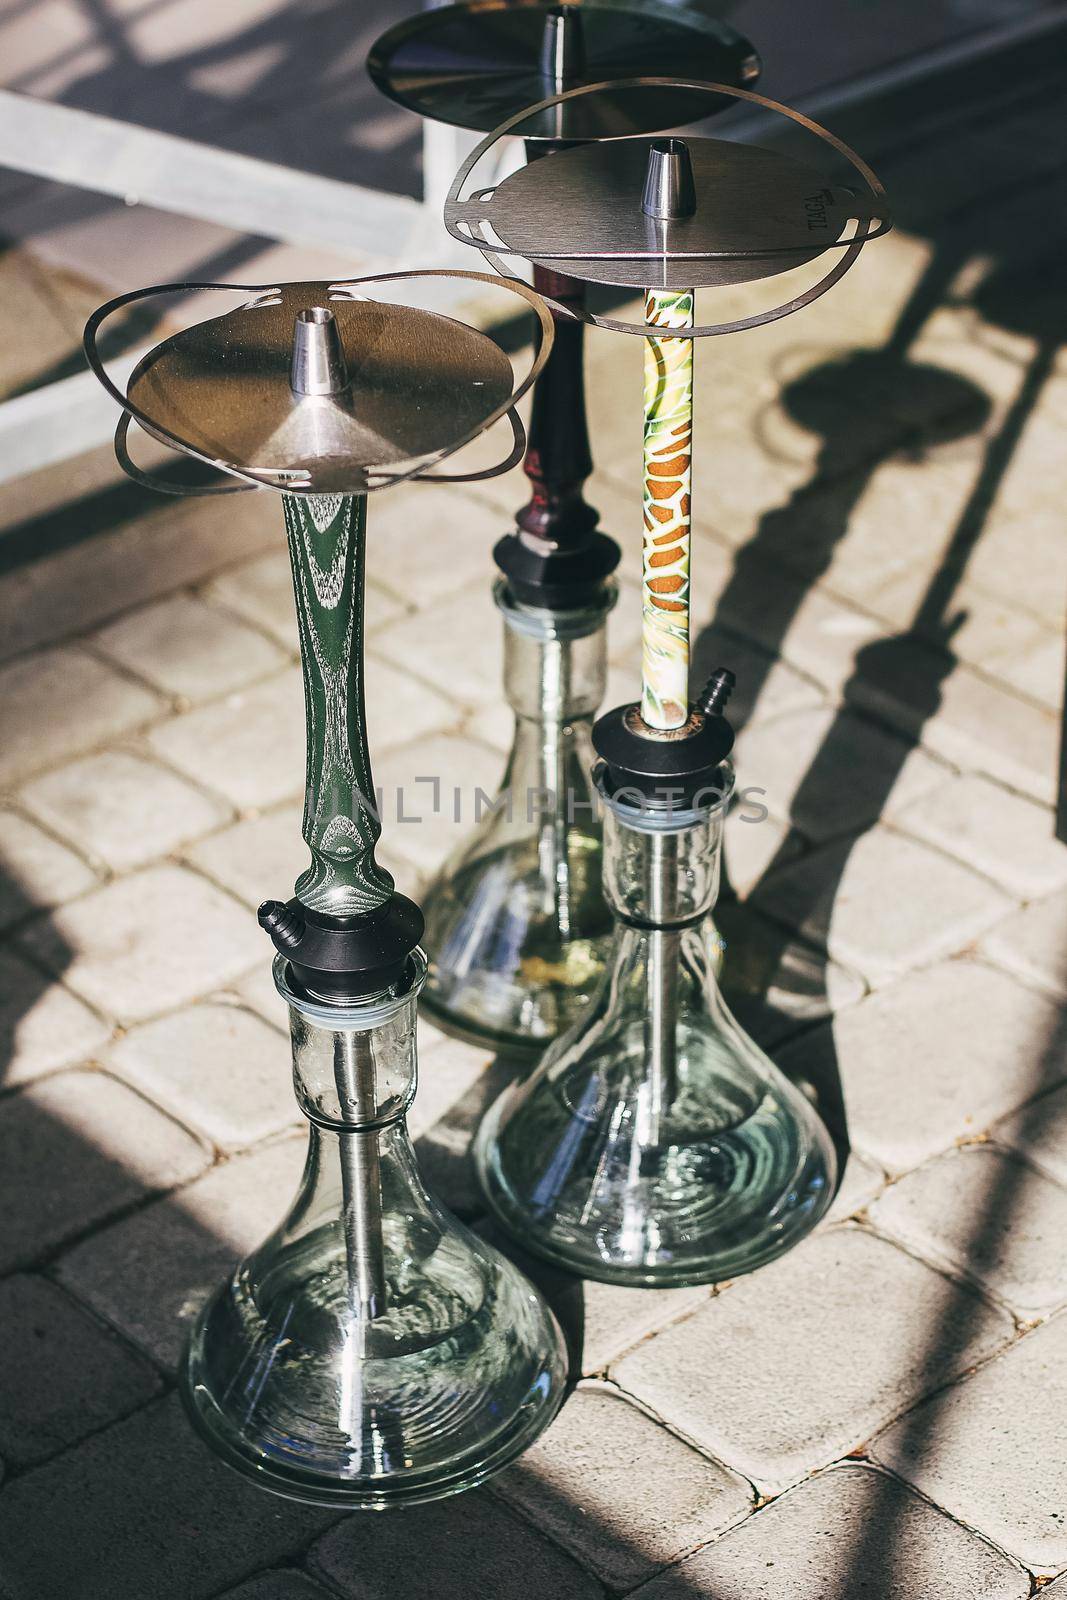 Hookah details for smoking and leisure in natural light.